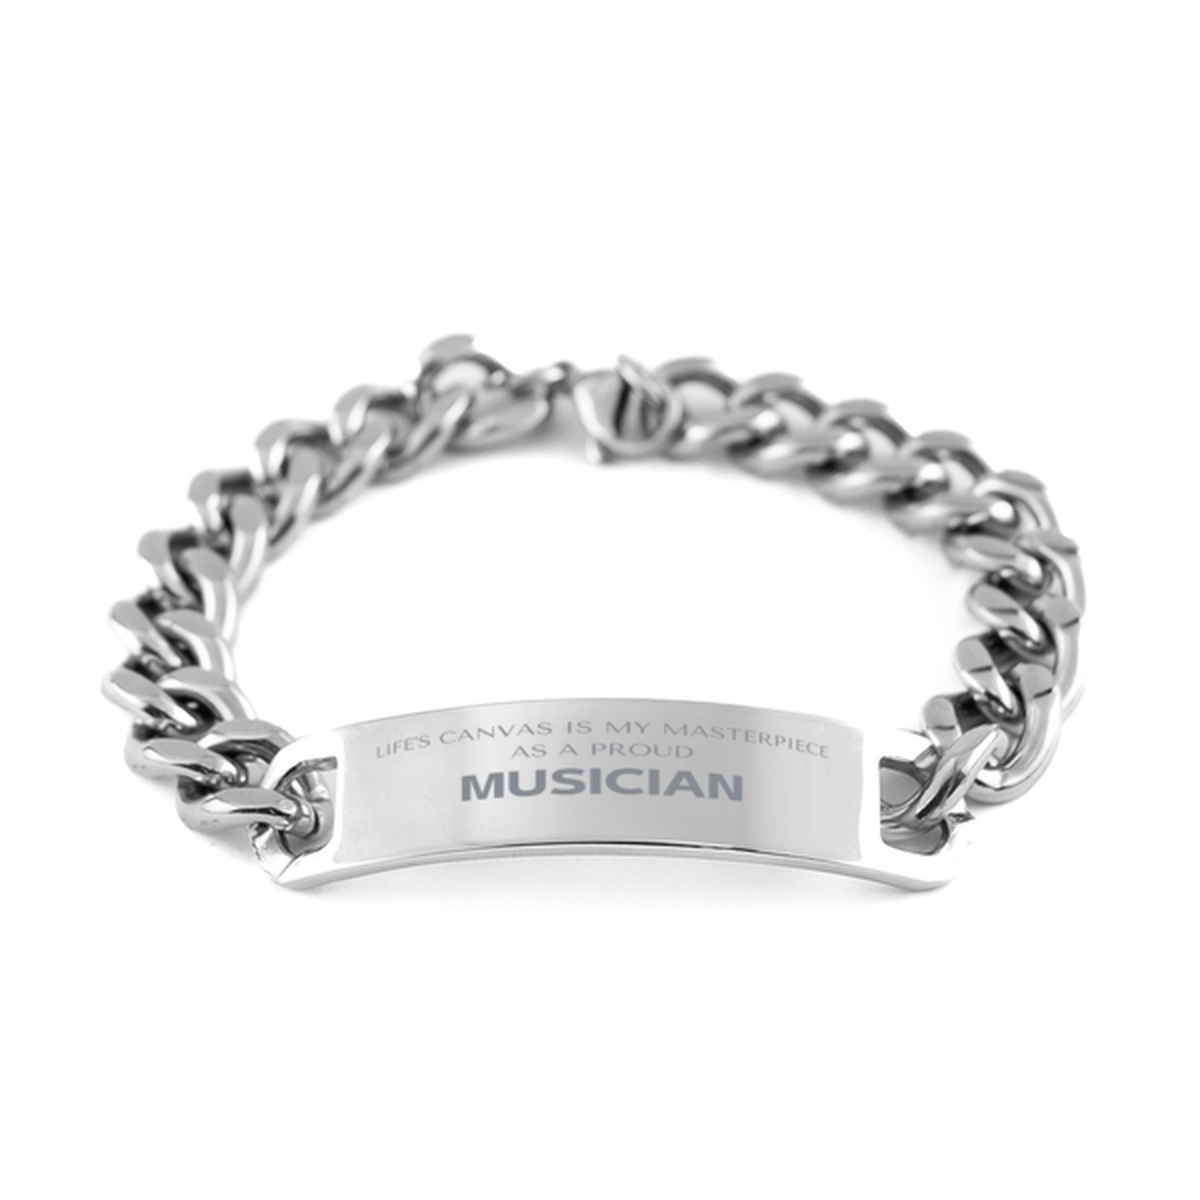 Proud Musician Gifts, Life's canvas is my masterpiece, Epic Birthday Christmas Unique Cuban Chain Stainless Steel Bracelet For Musician, Coworkers, Men, Women, Friends